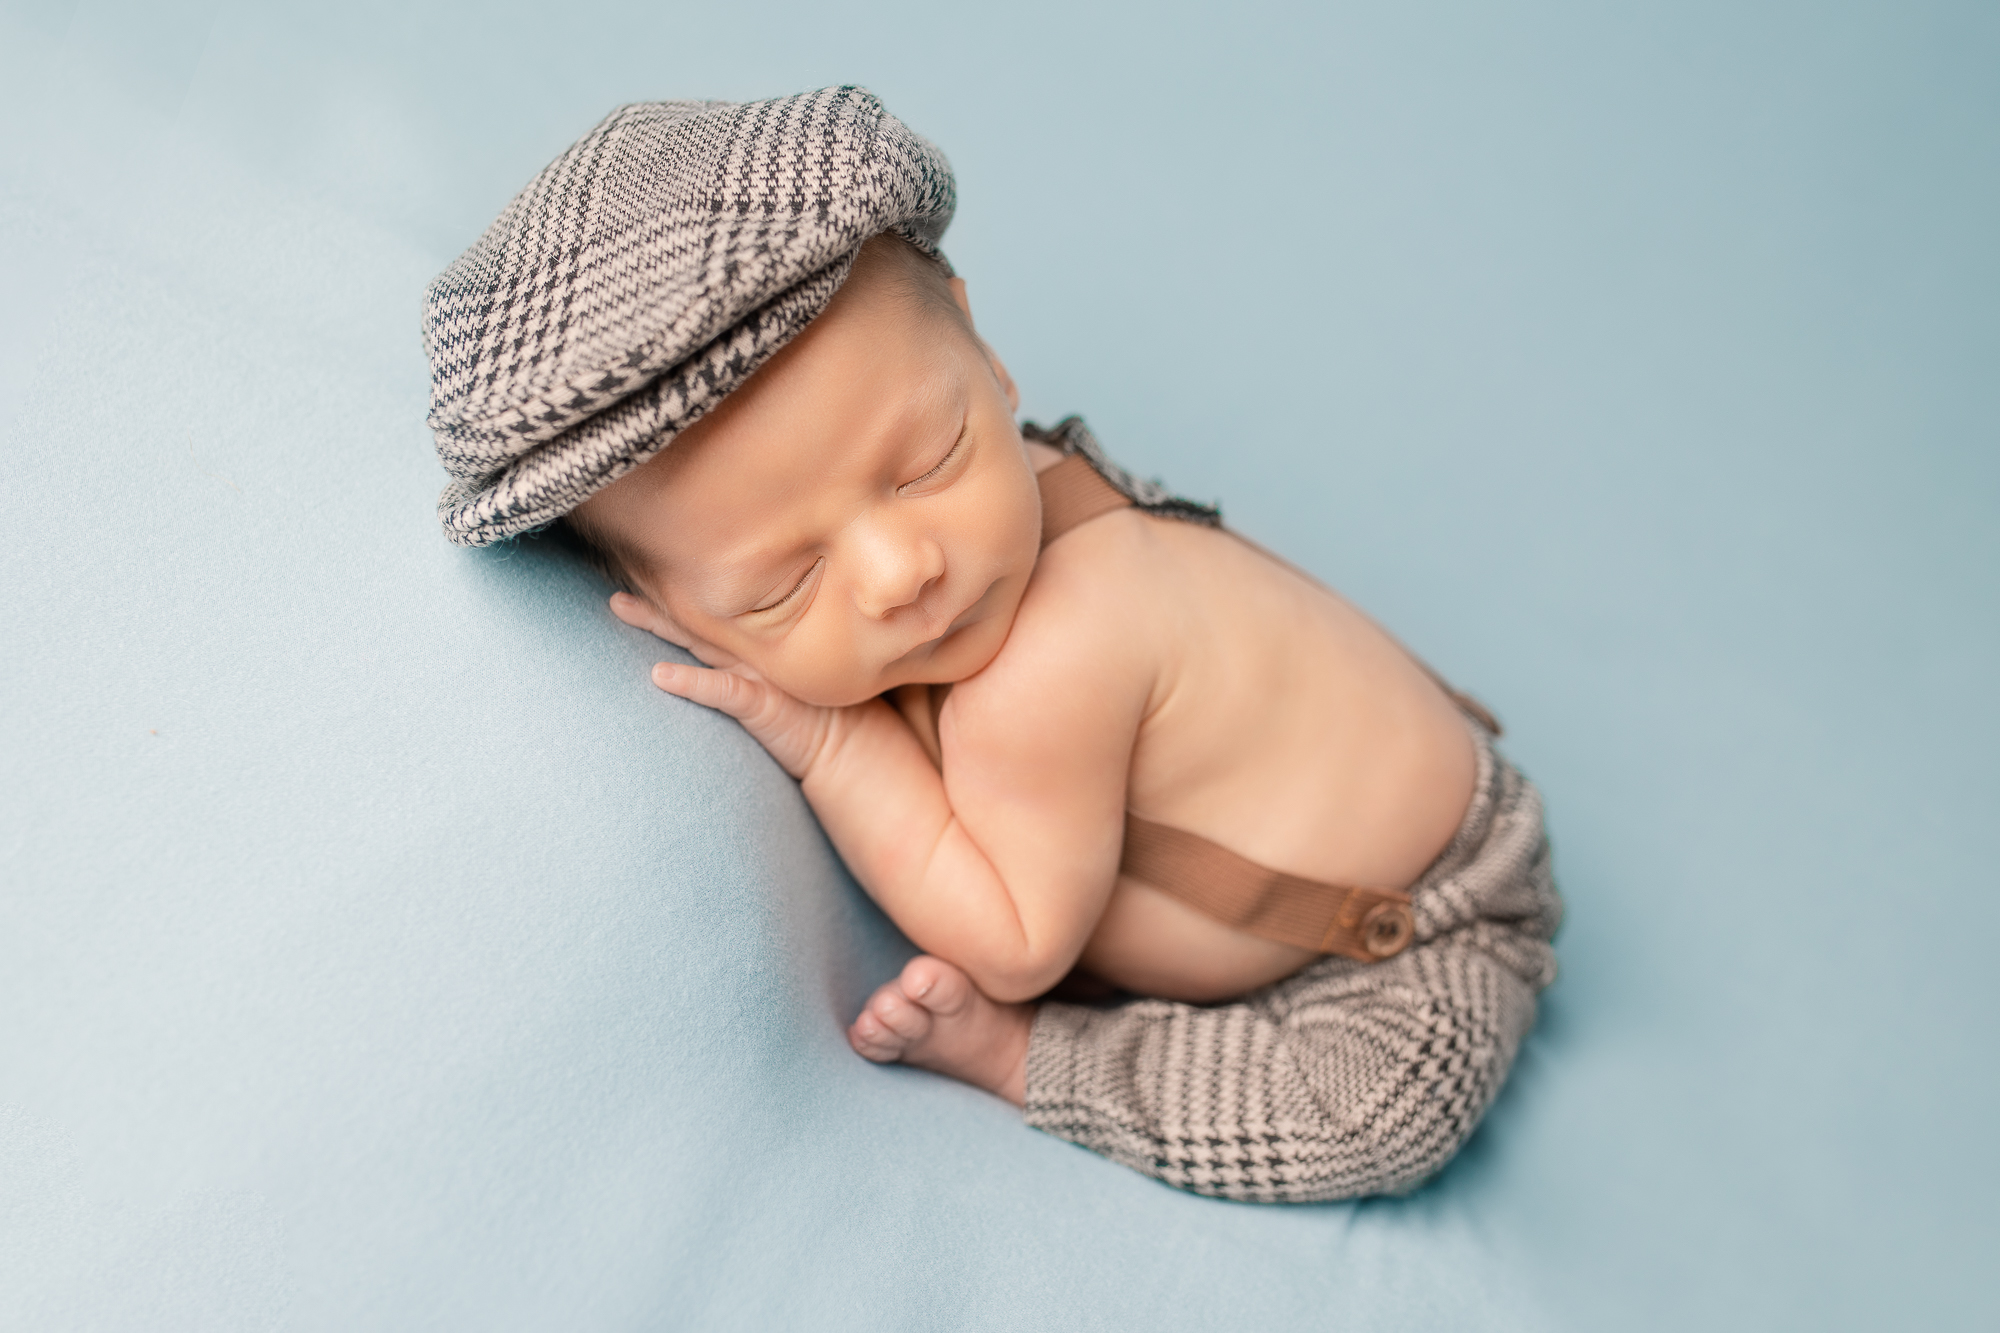 taco womb pose for newborn baby boy in gentlemen outfit